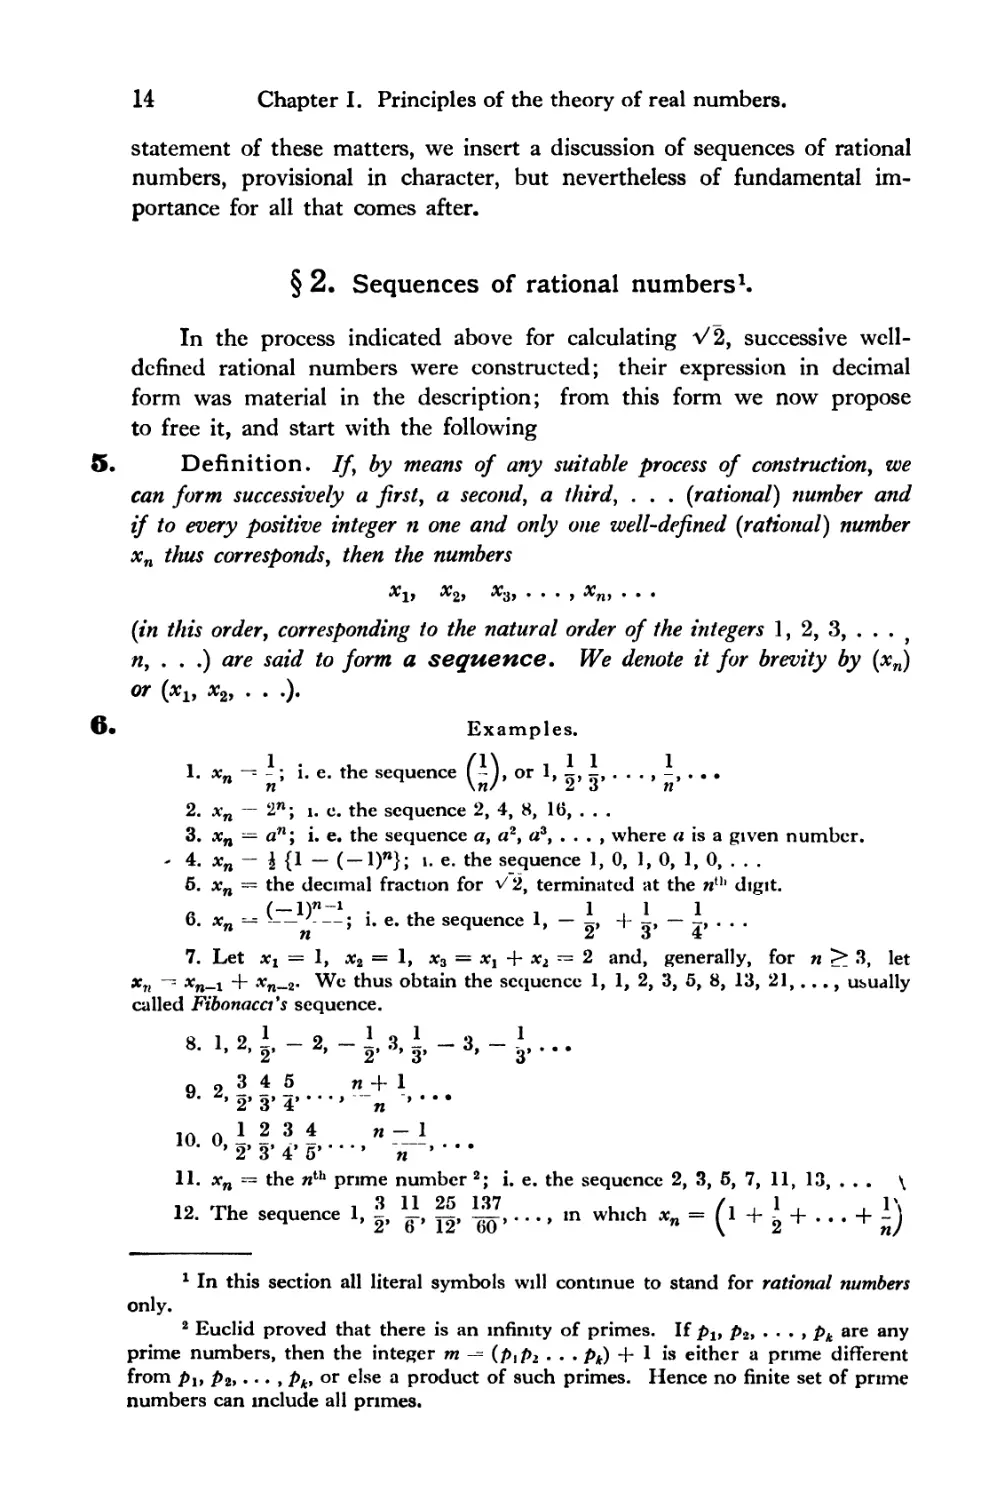 § 2. Sequences of rational numbers